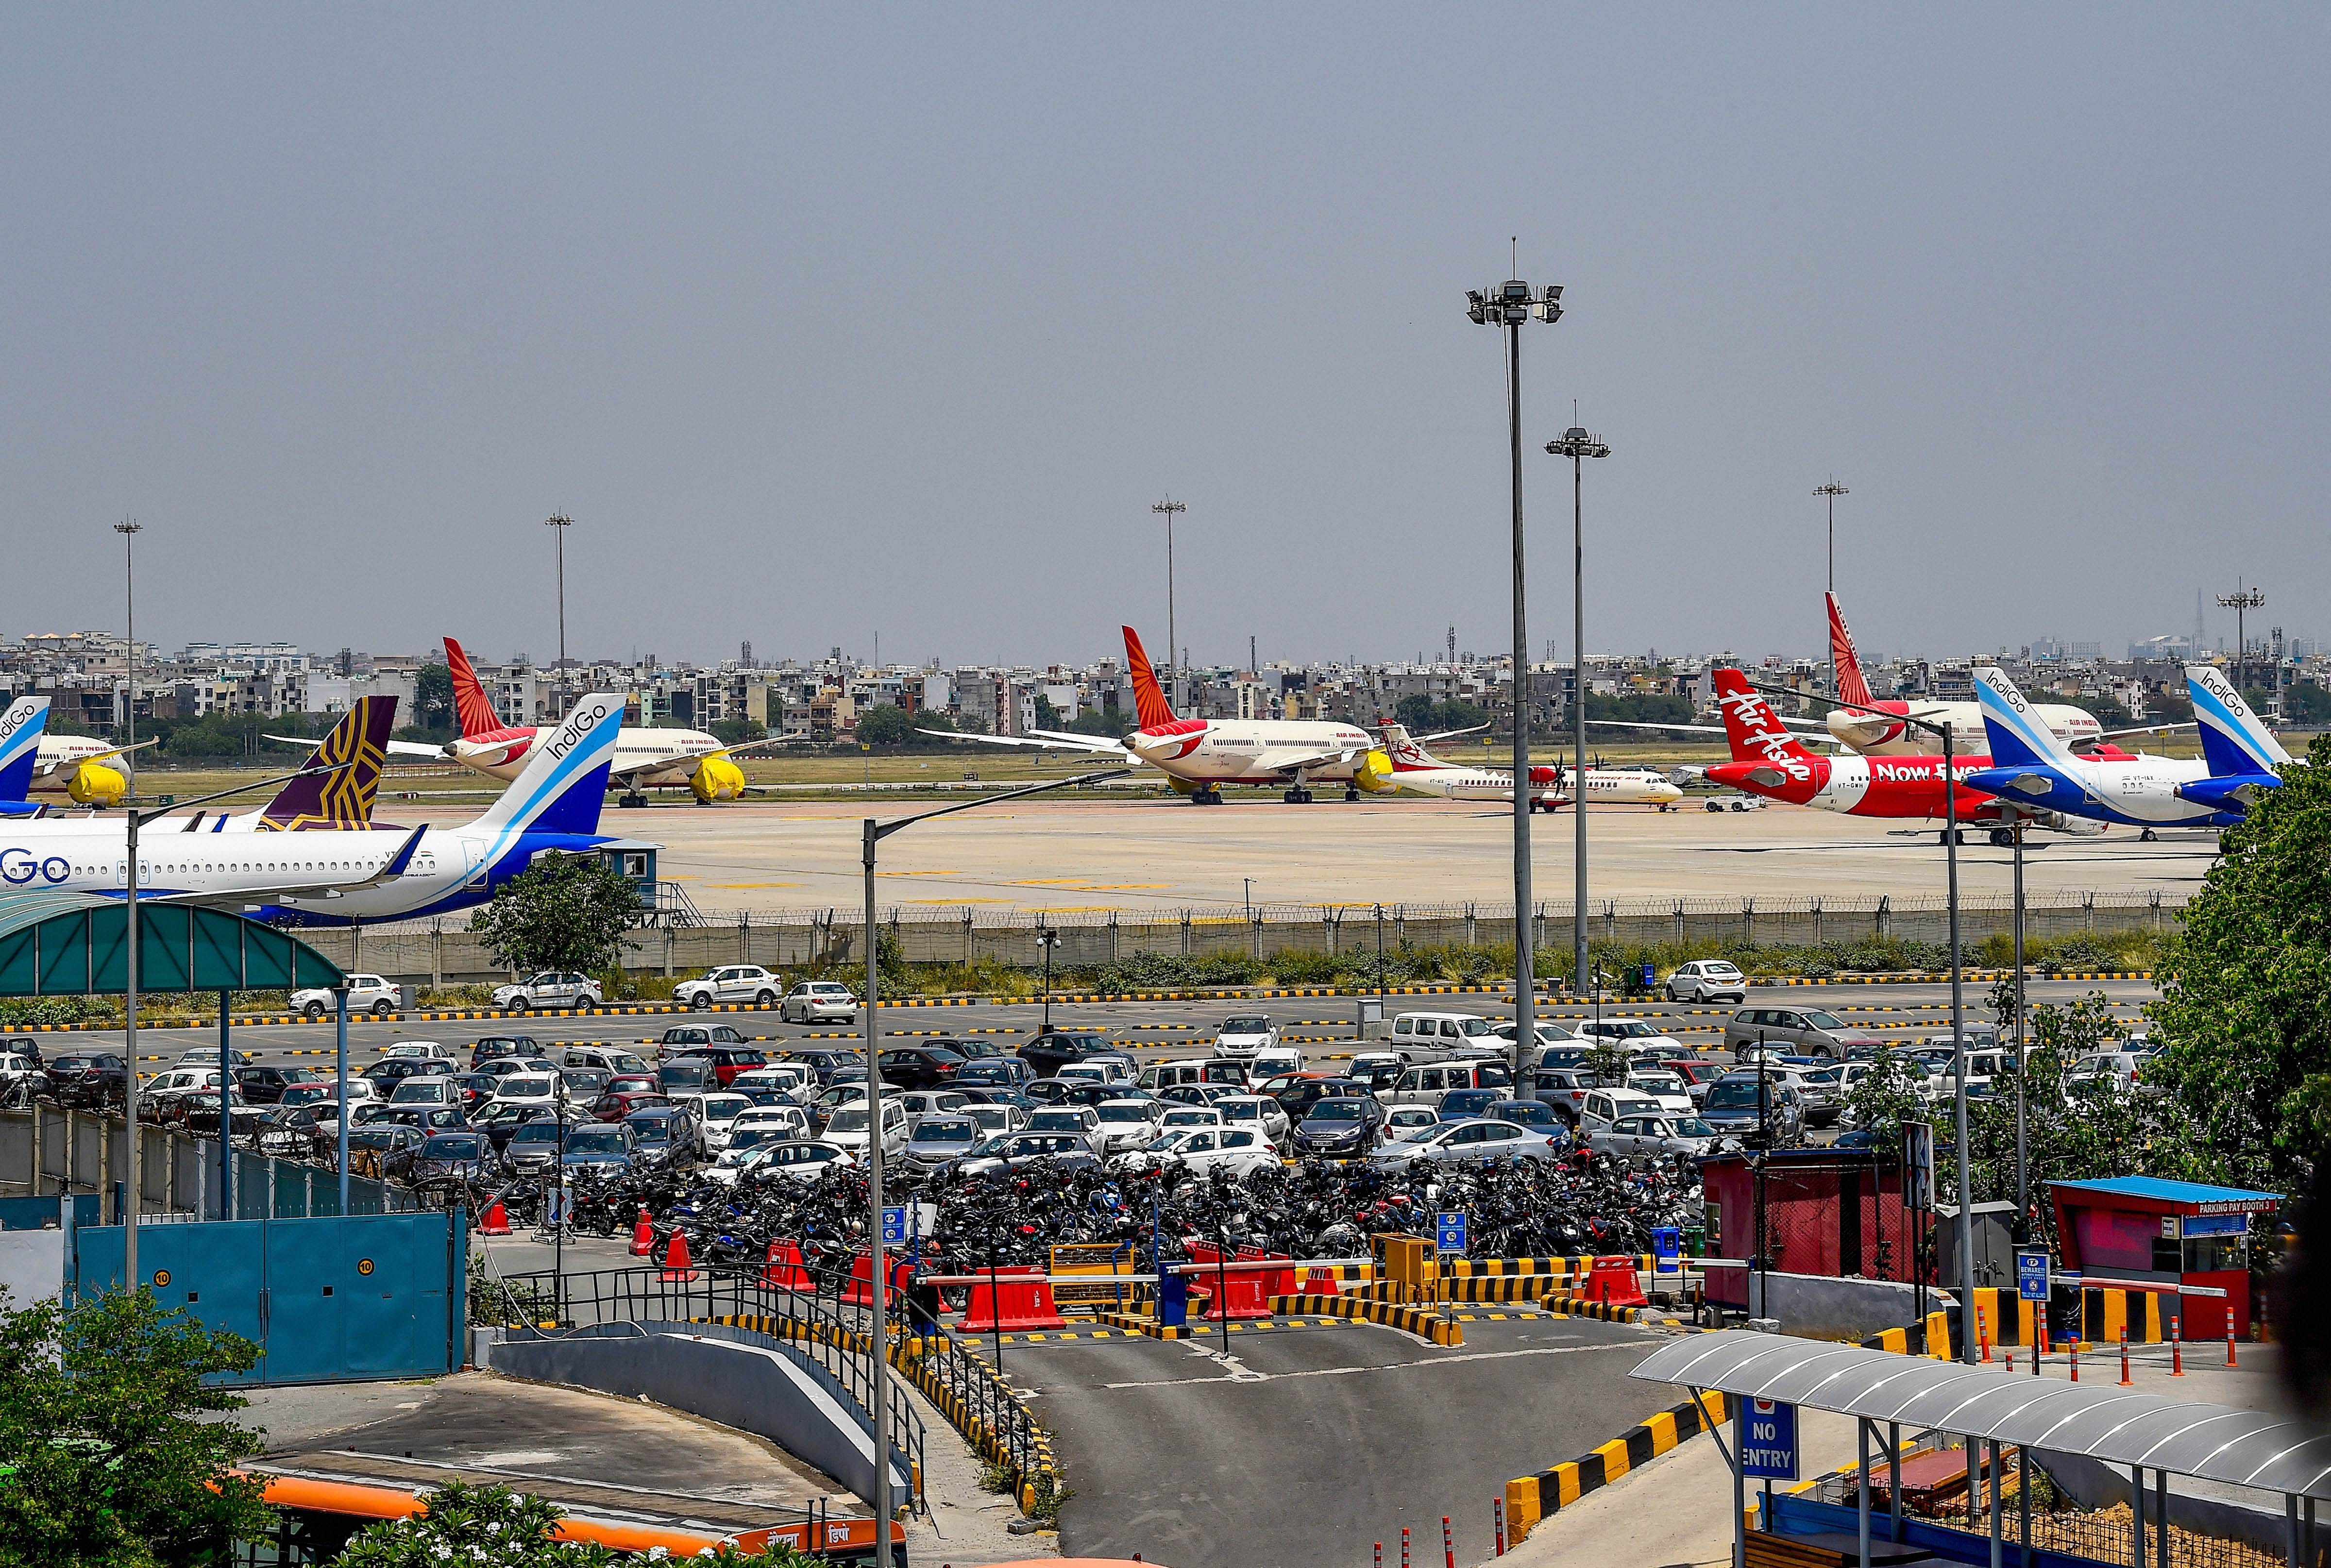 Prior to suspension of air services in March, the Mumbai airport had been operating over 1,000 flights per day. (PTI Photo)